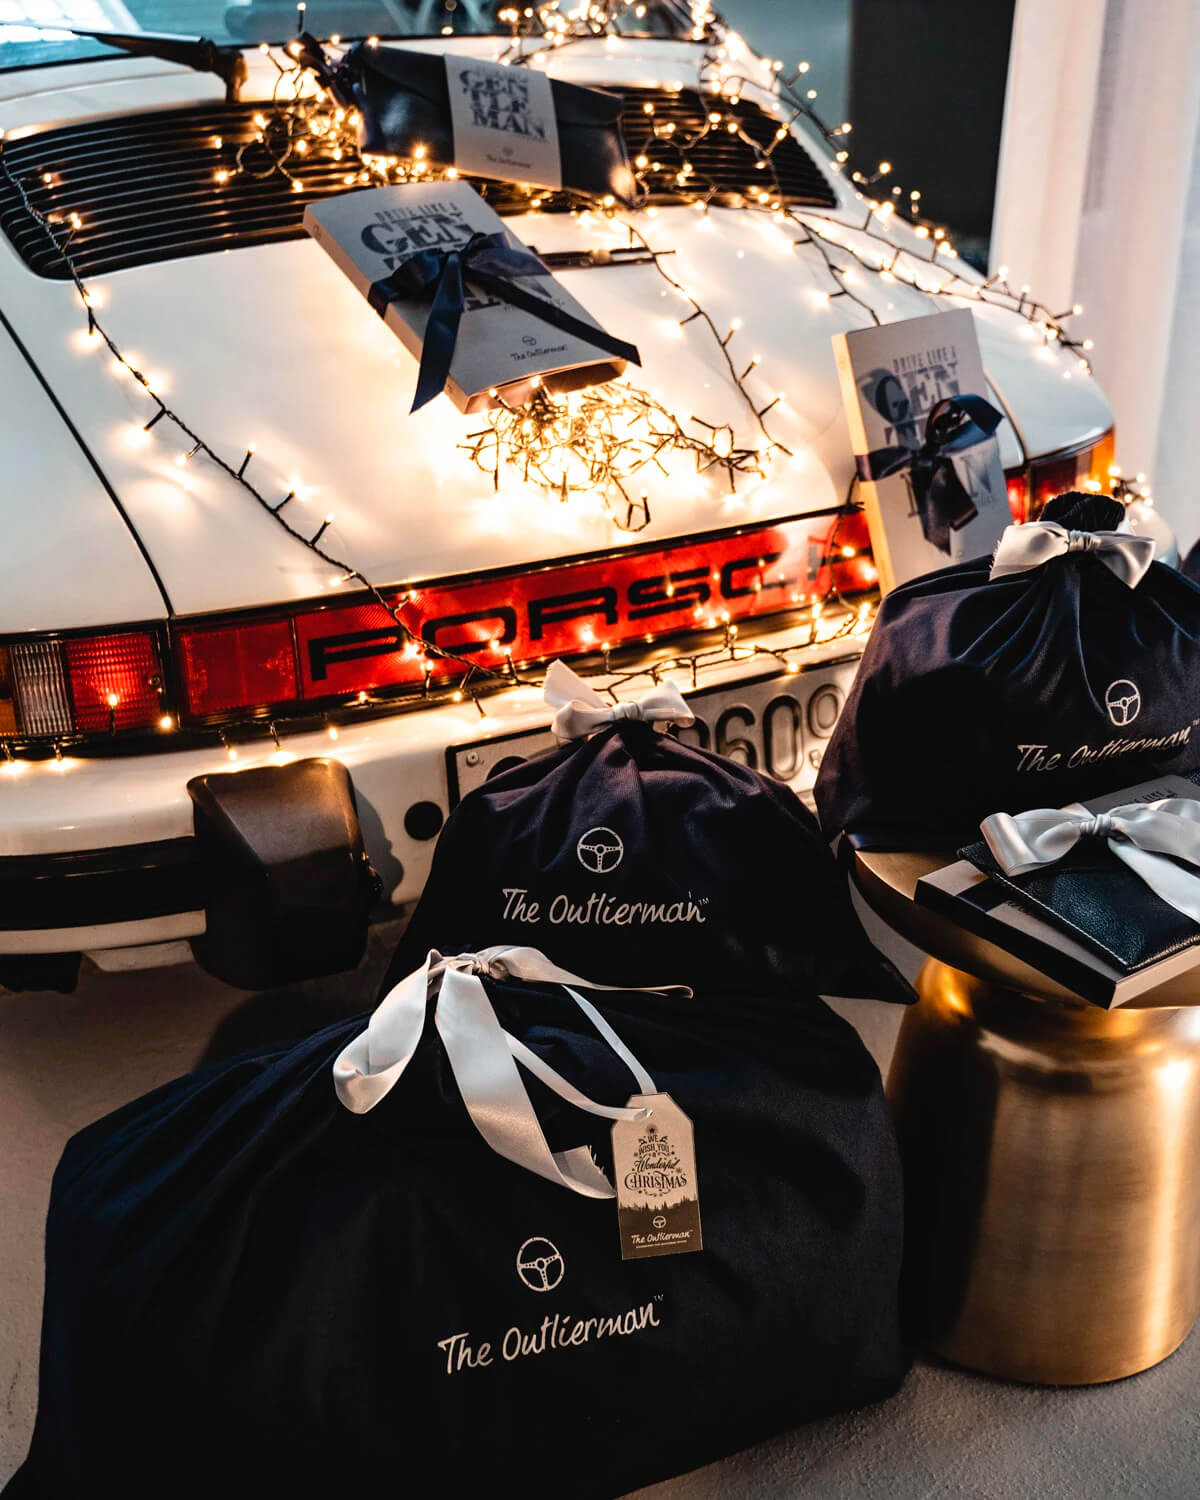 Classic Porsche 911 and The Outlierman Christmas gifts